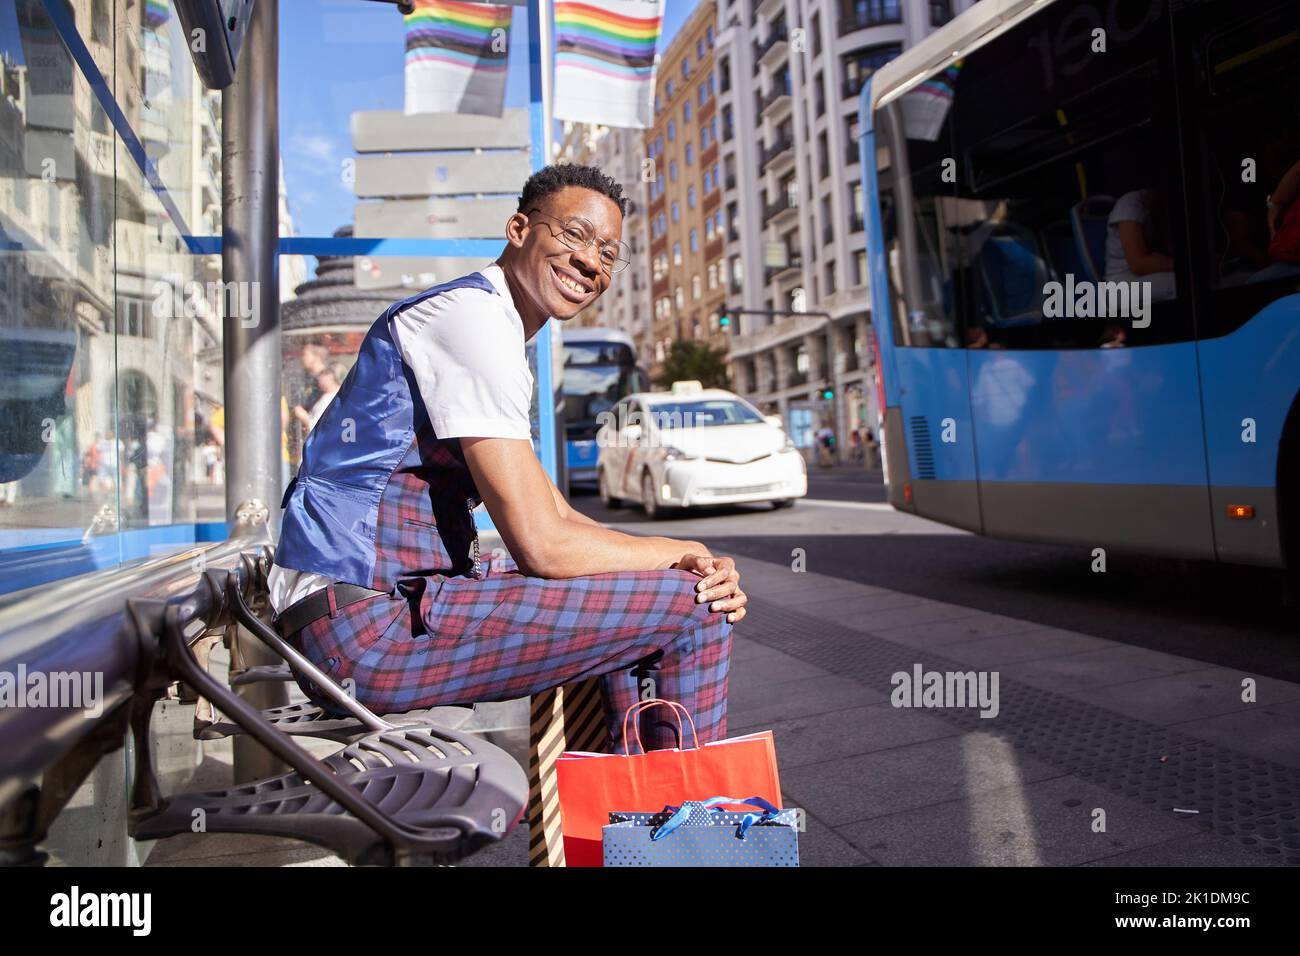 young African American man sitting at the bus stop with shopping bags. Stock Photo